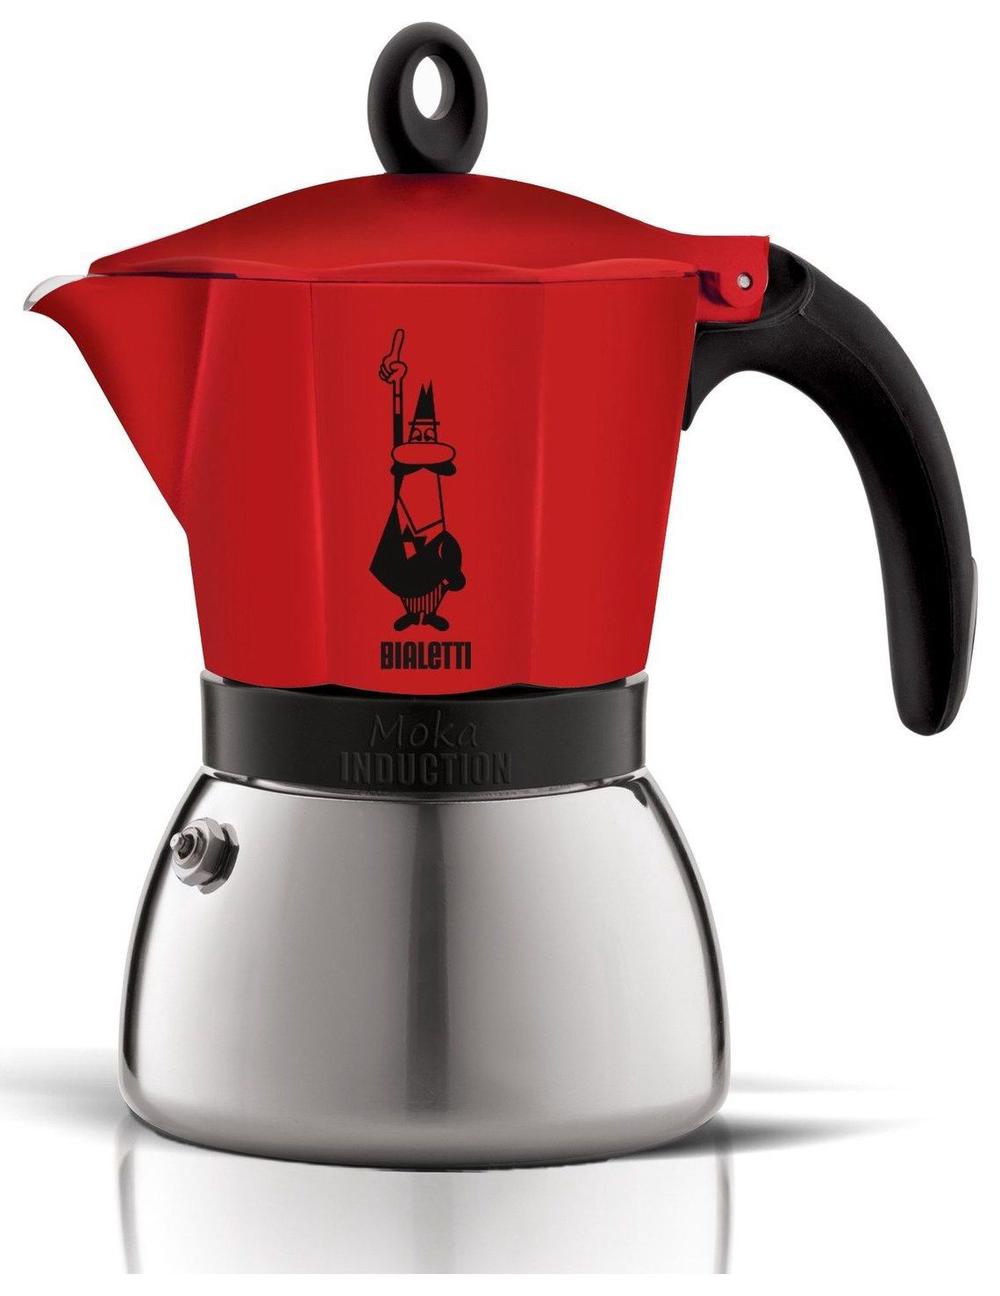 Bialetti Moka Induction Coffee Maker Red 6 Cups Buy Online At The Nile